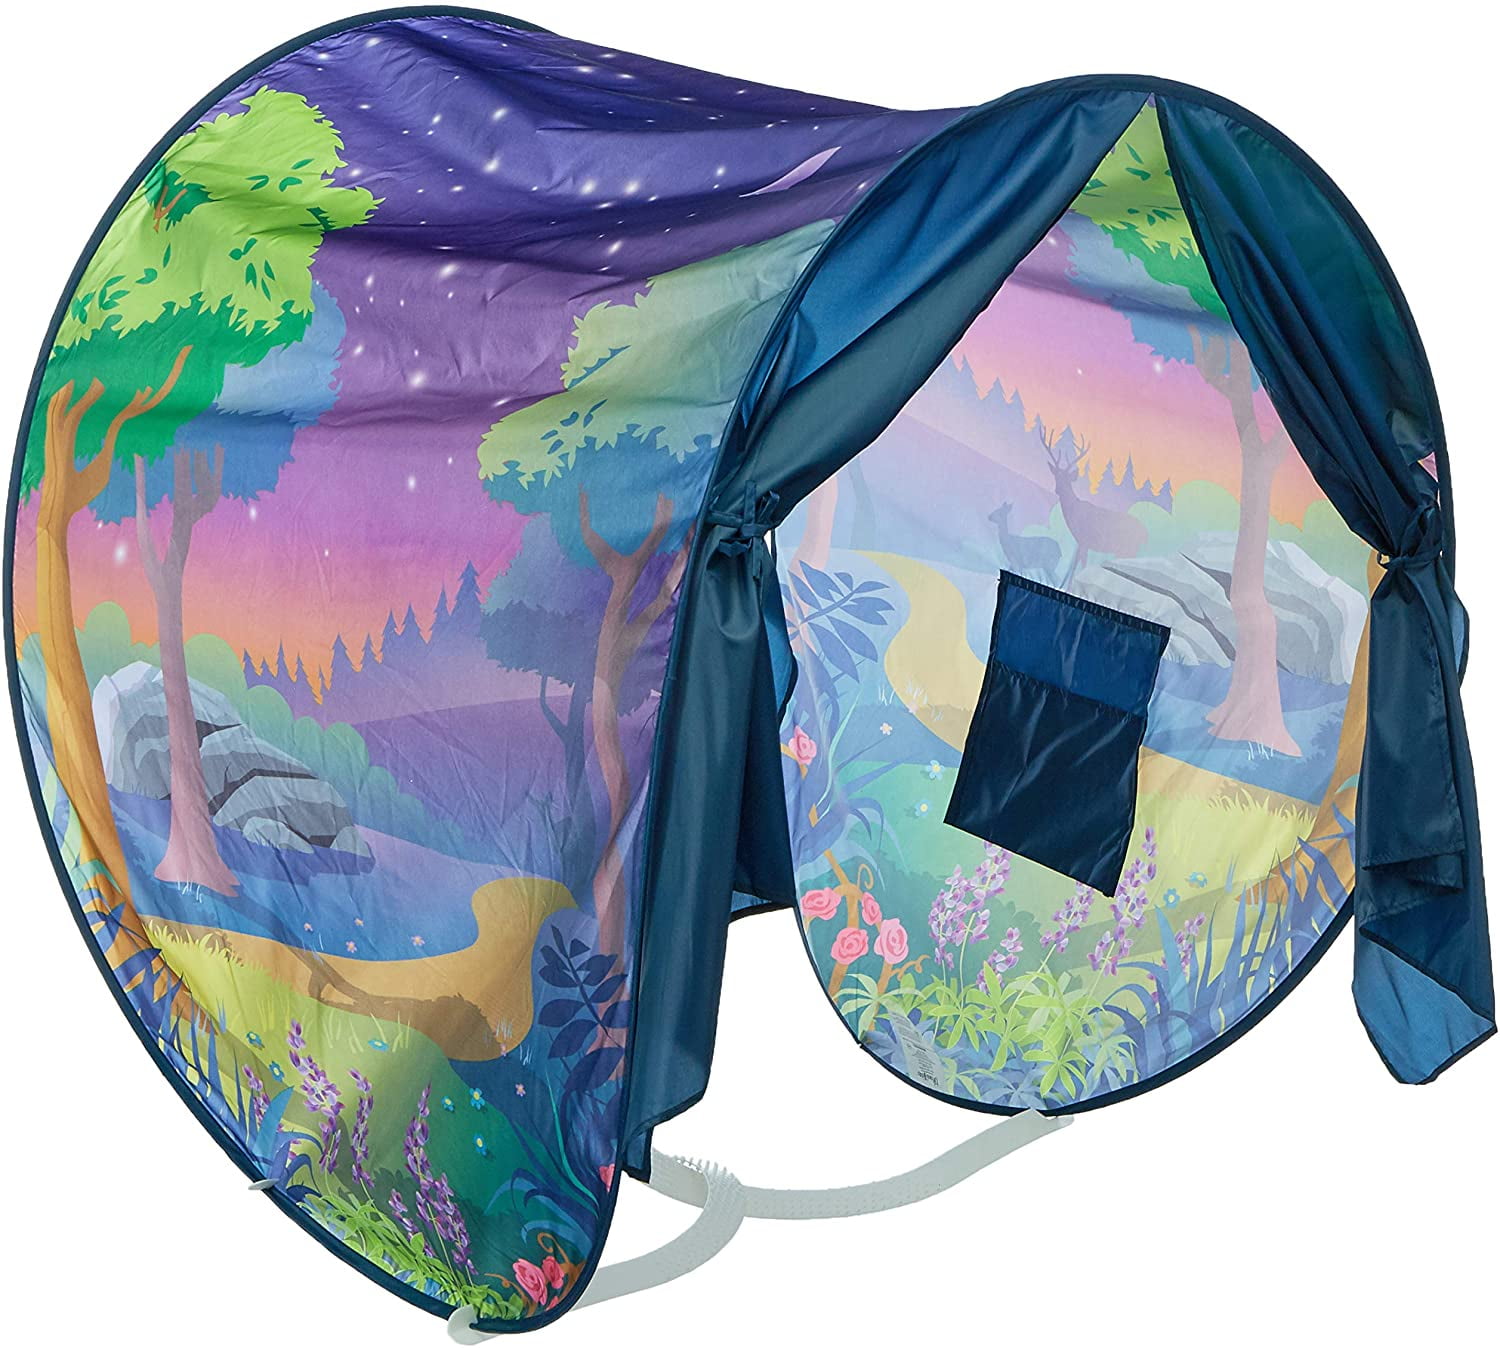 Reading Light H016 Kids Dream Tents Unicorn Foldable Tent Pop Up Indoor Bed